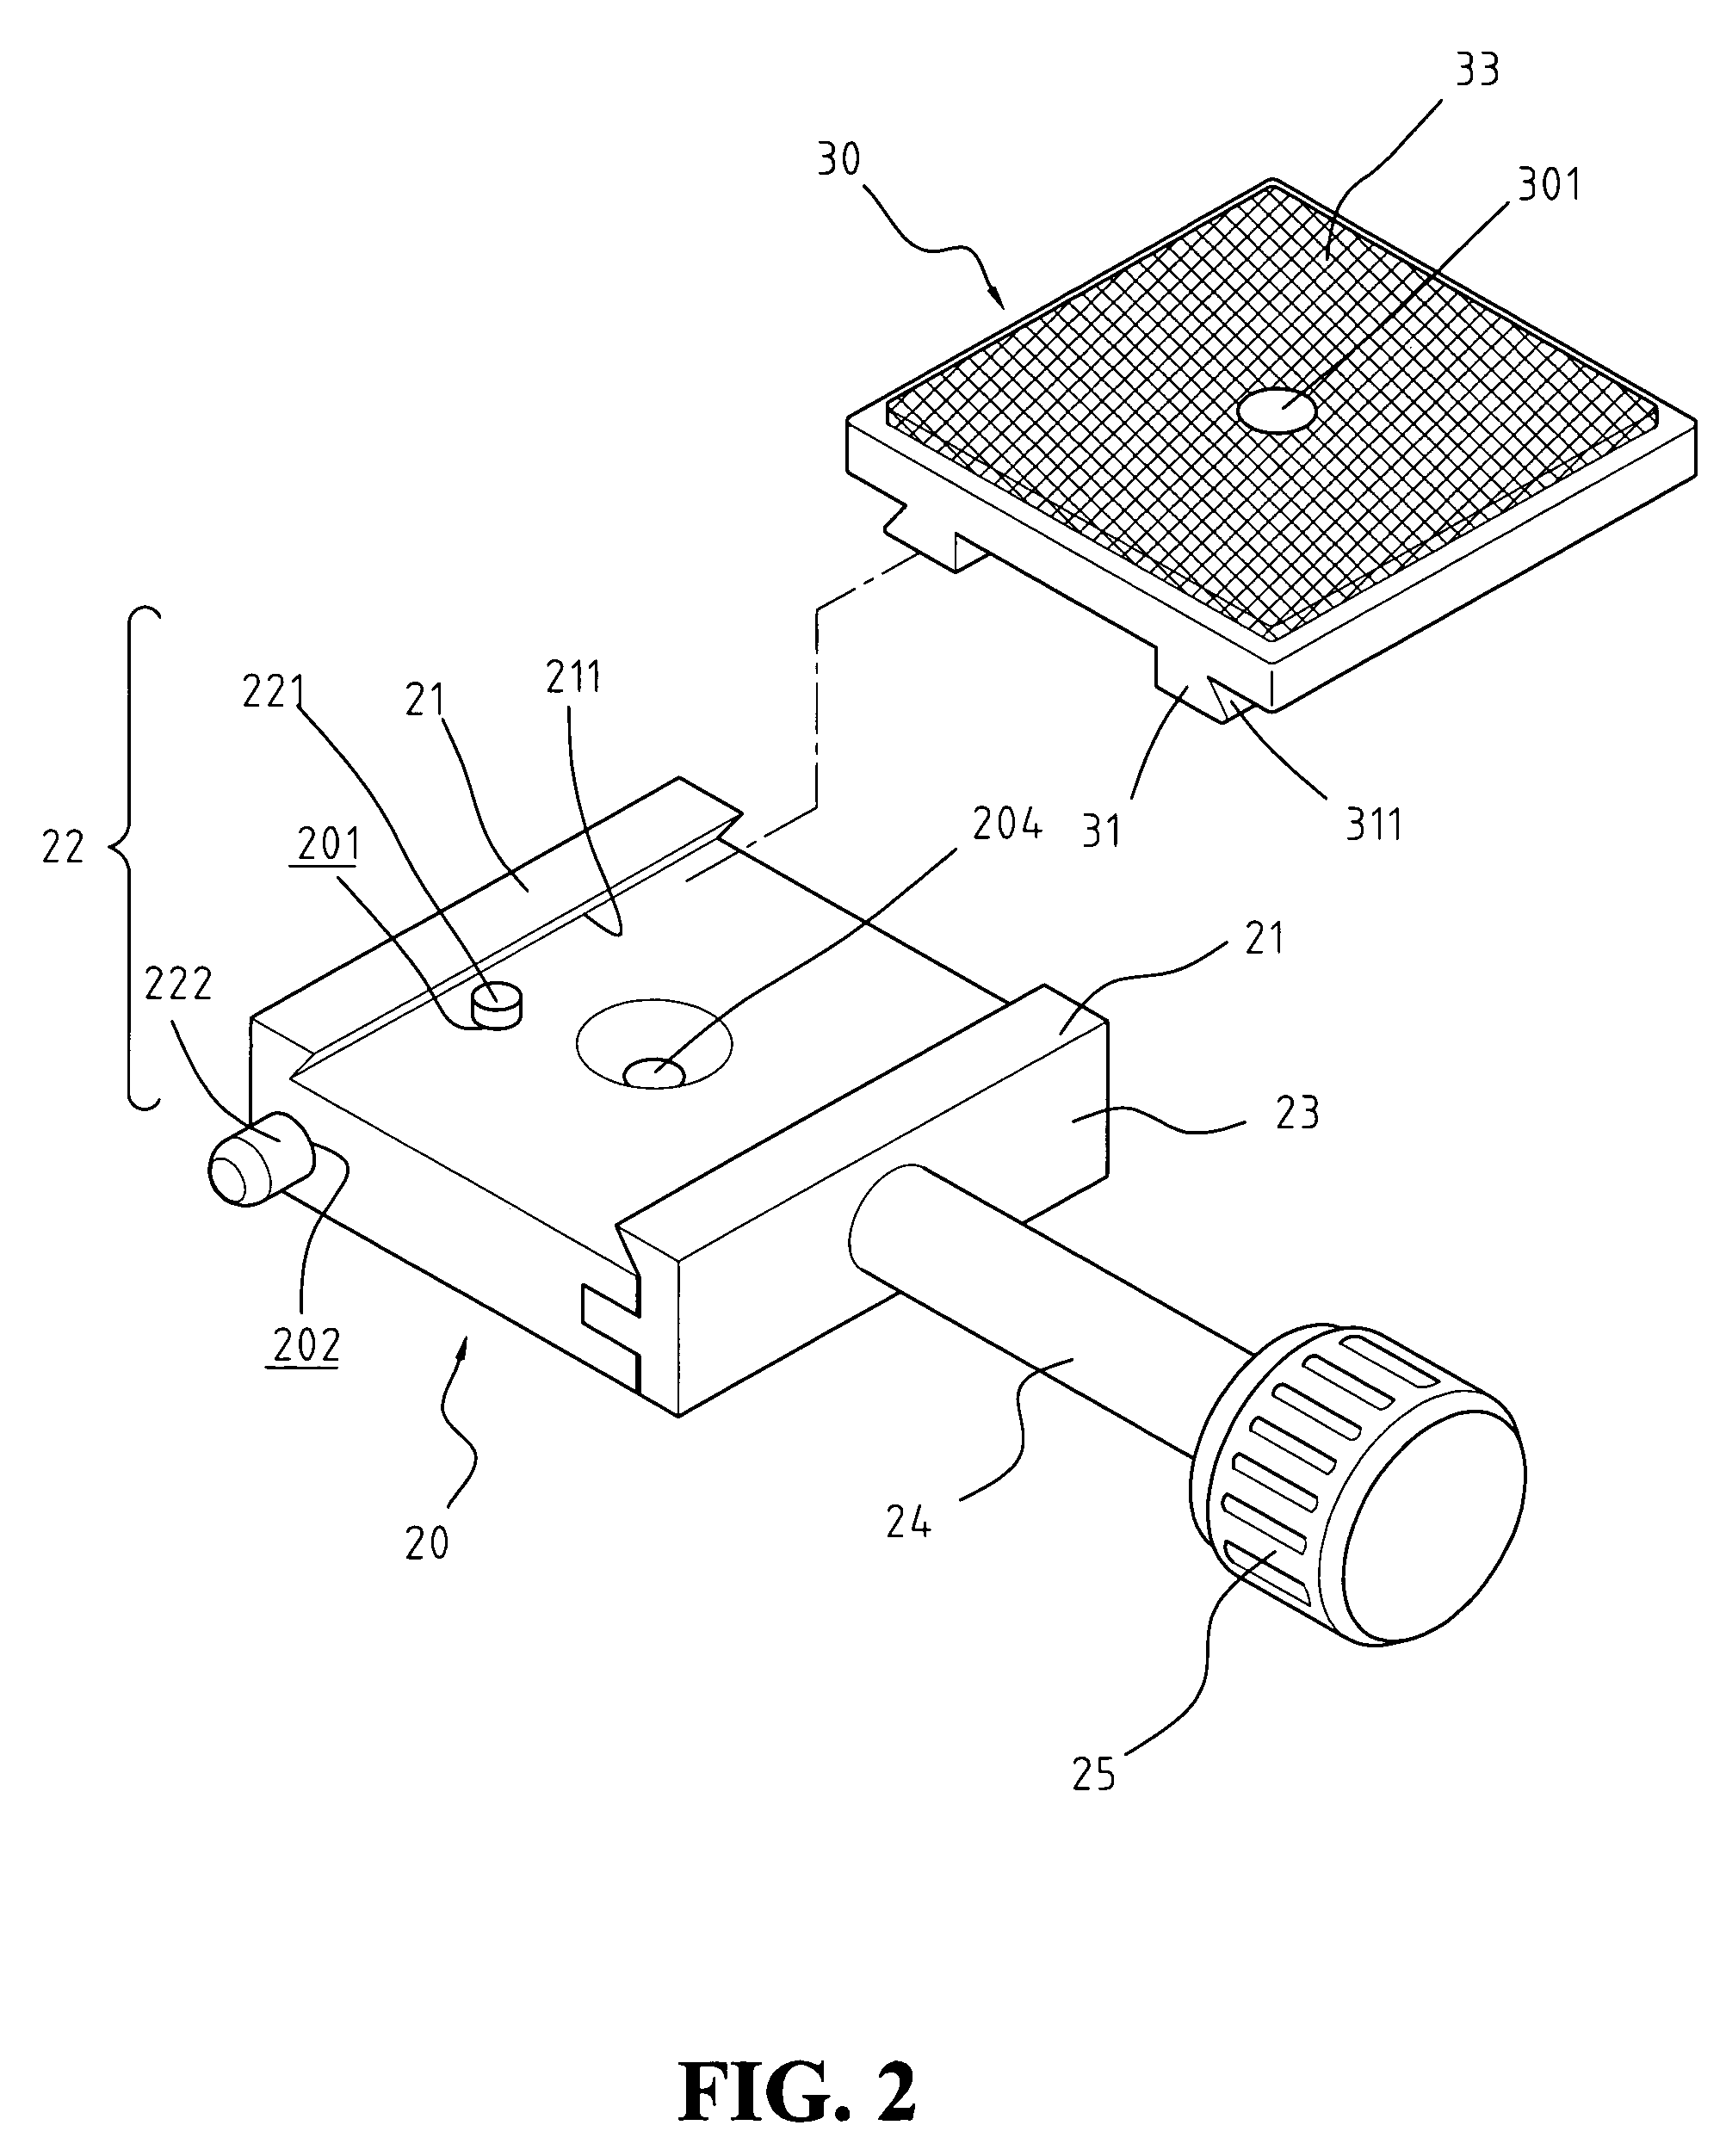 Mounting platform assembly for a stand device